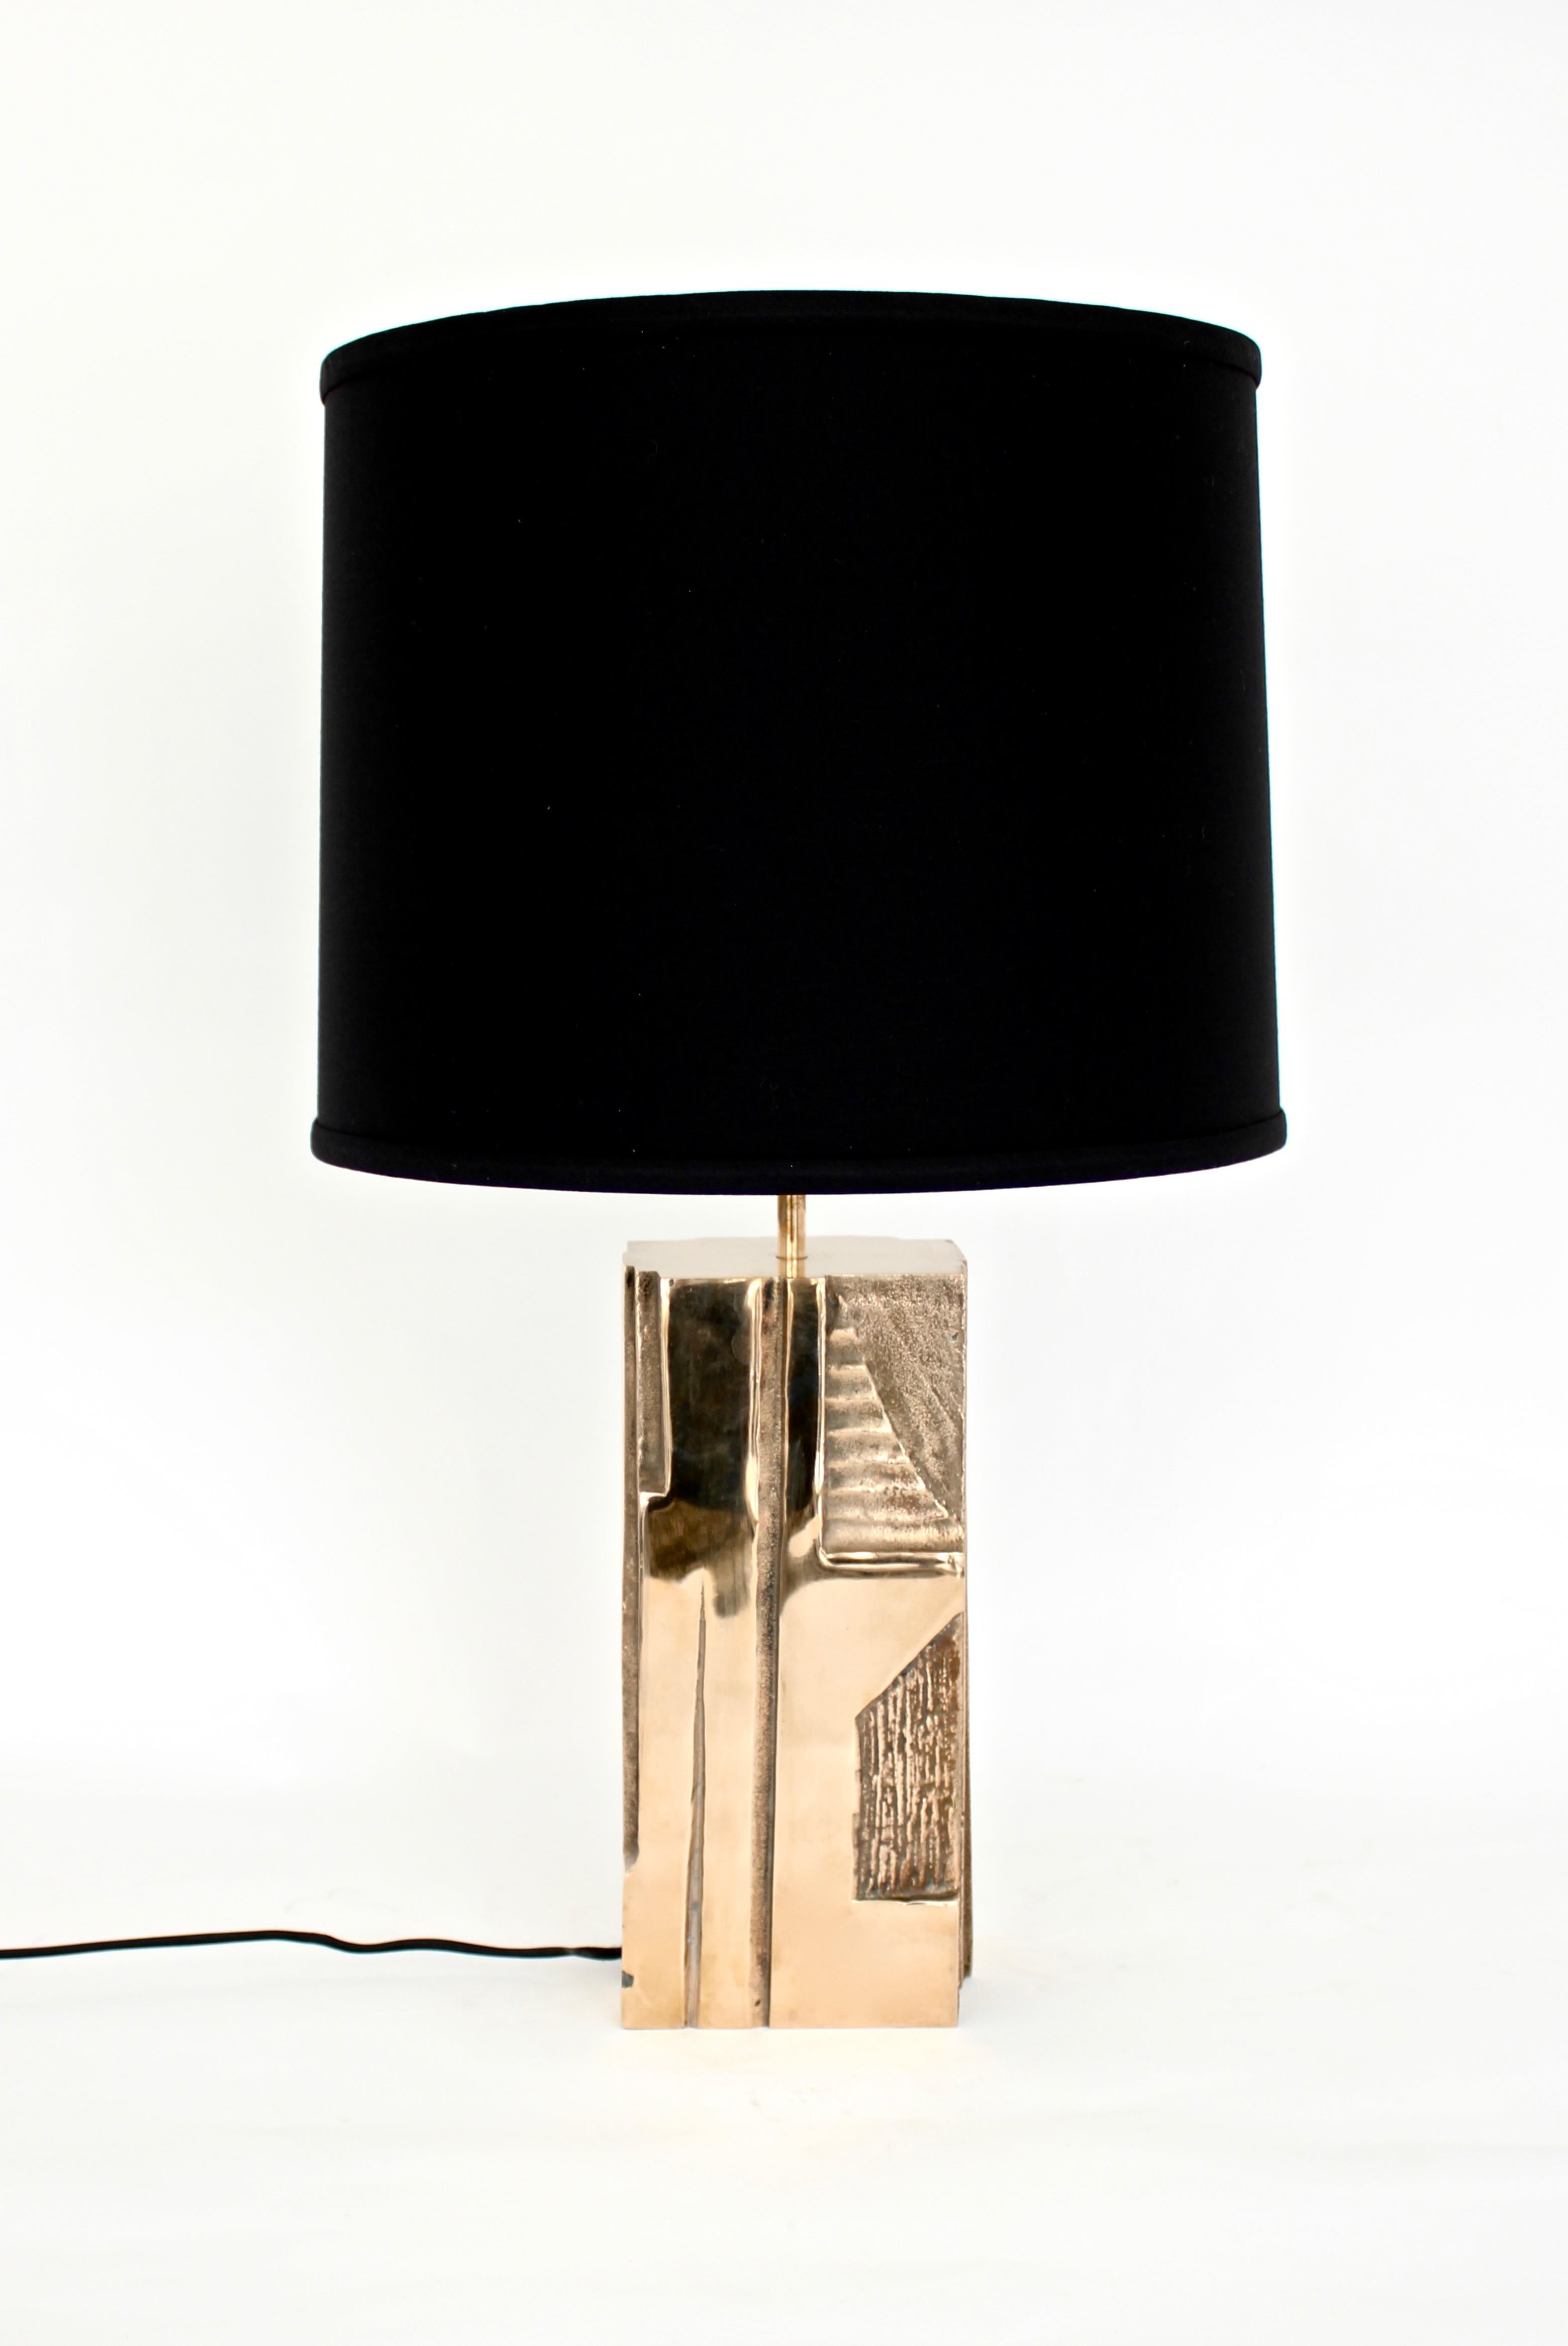 Michel Mangematin French architect pair of French bronze table lamps.
Abstract patterns in the design are recessed and exhibit wonderful variation and texture. These solid bronze table lamps have an amazing abstract modern pattern in the lamp body